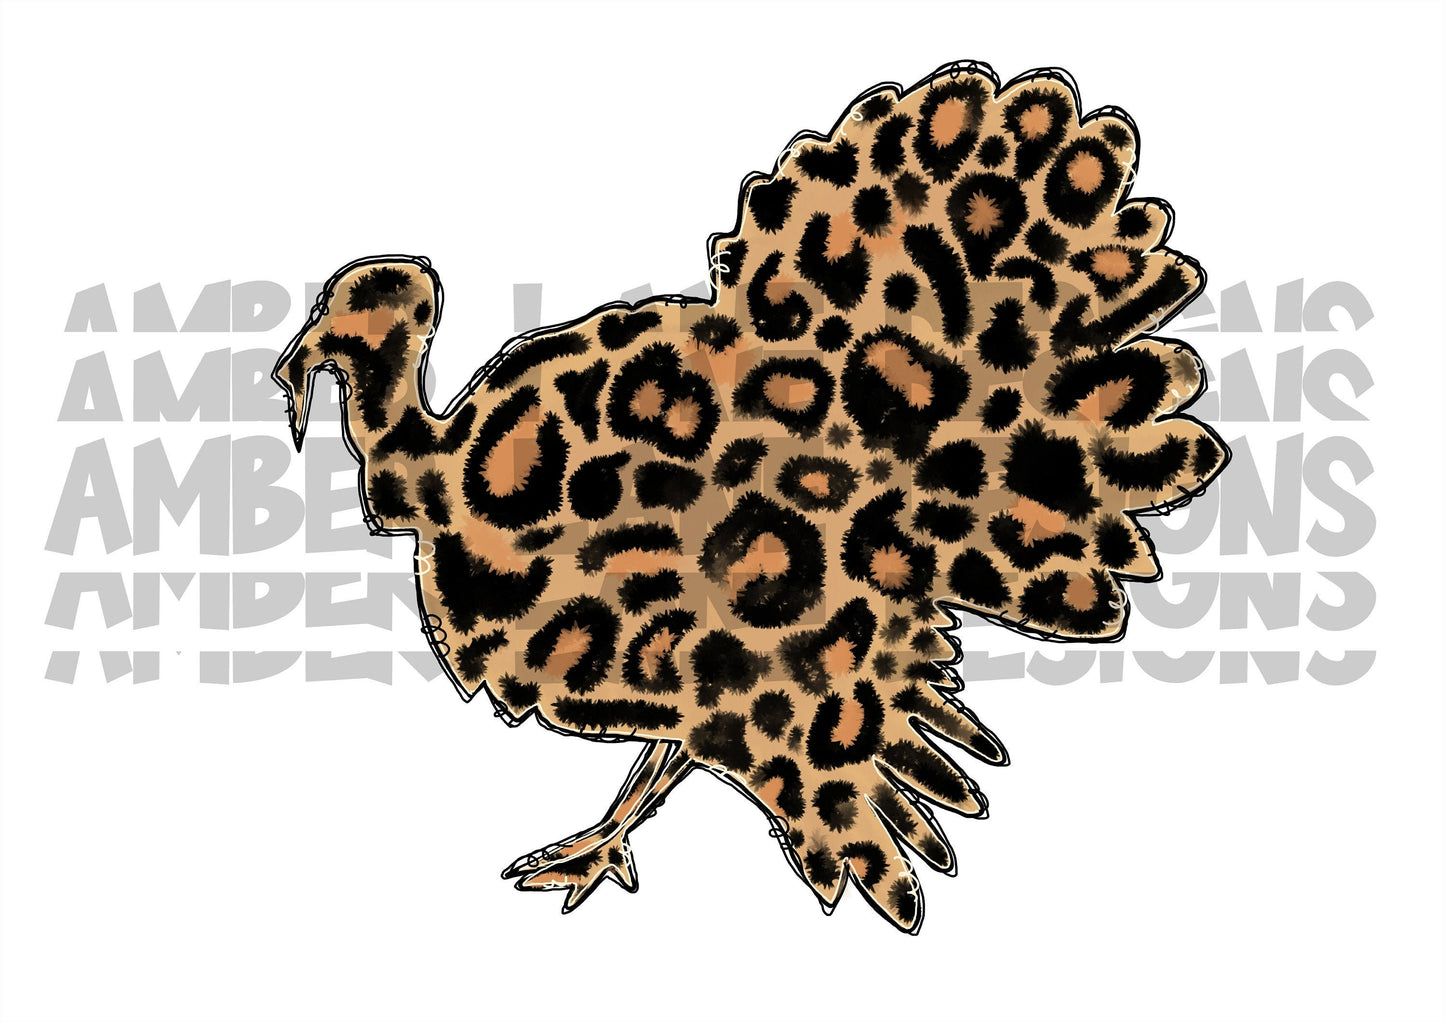 Turkey Leopard Print watercolor PNG |Turkey cheetah Watercolor Sublimation png | Thanksgiving | Fall Colors  -INSTANT DOWNLOAD